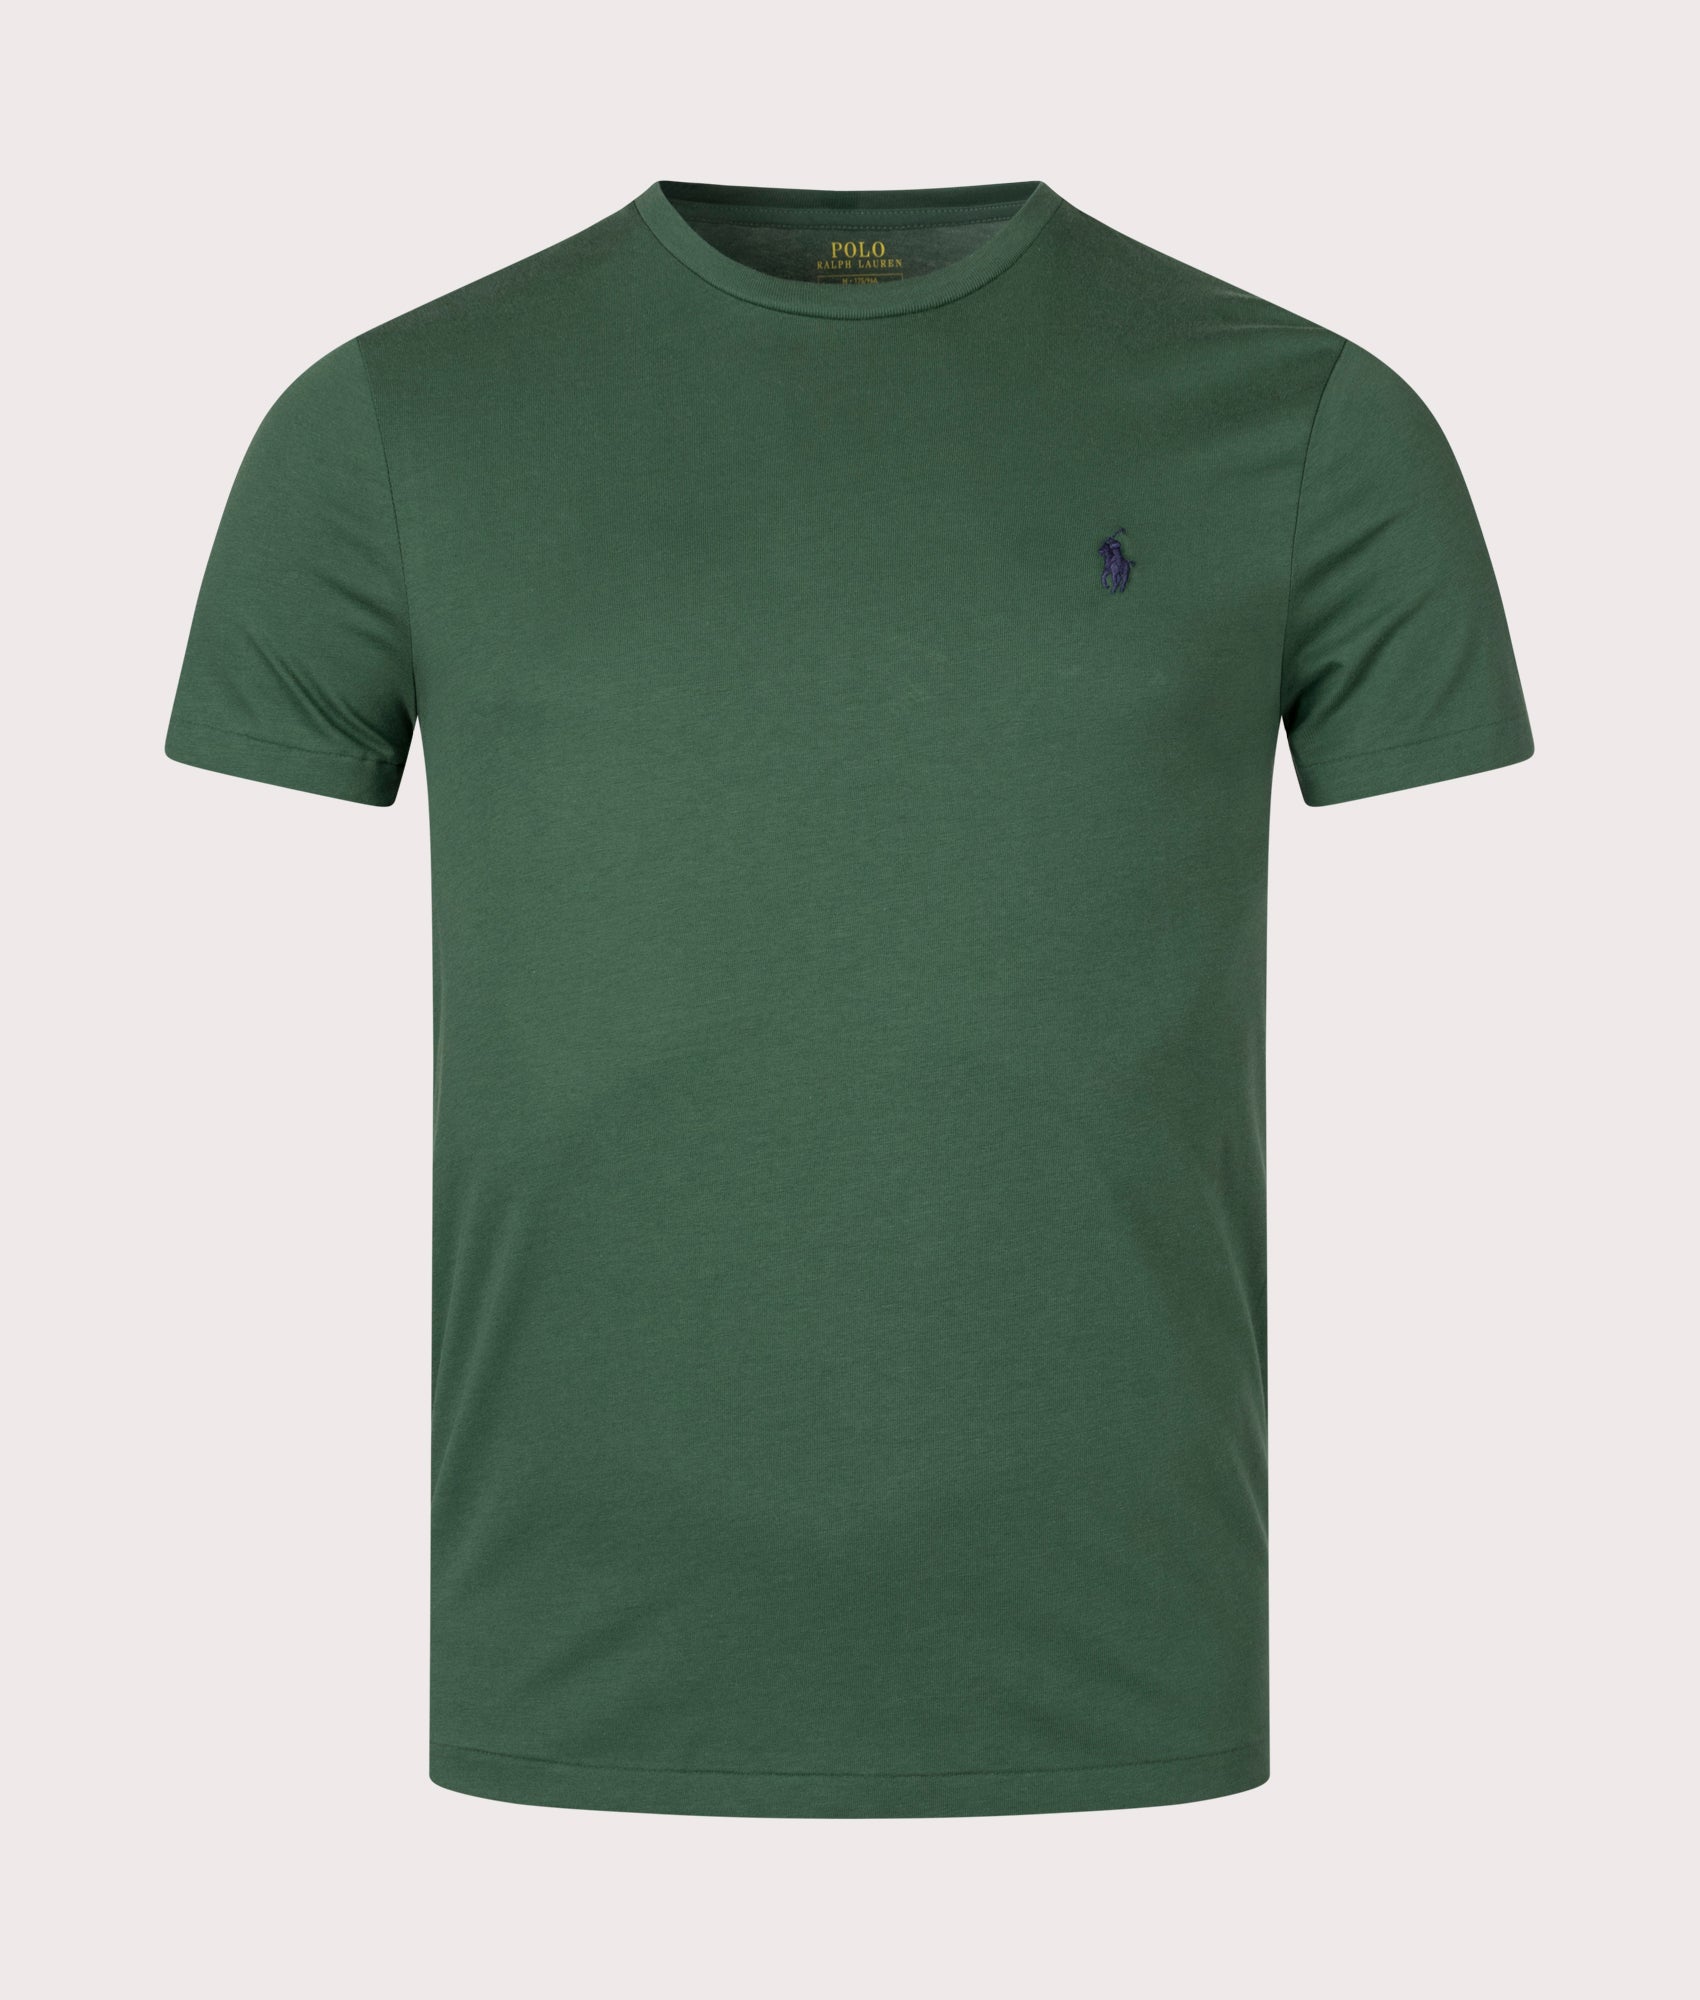 Polo Ralph Lauren Mens Custom Slim Fit T-Shirt - Colour: 323 Washed Forest - Size: XL